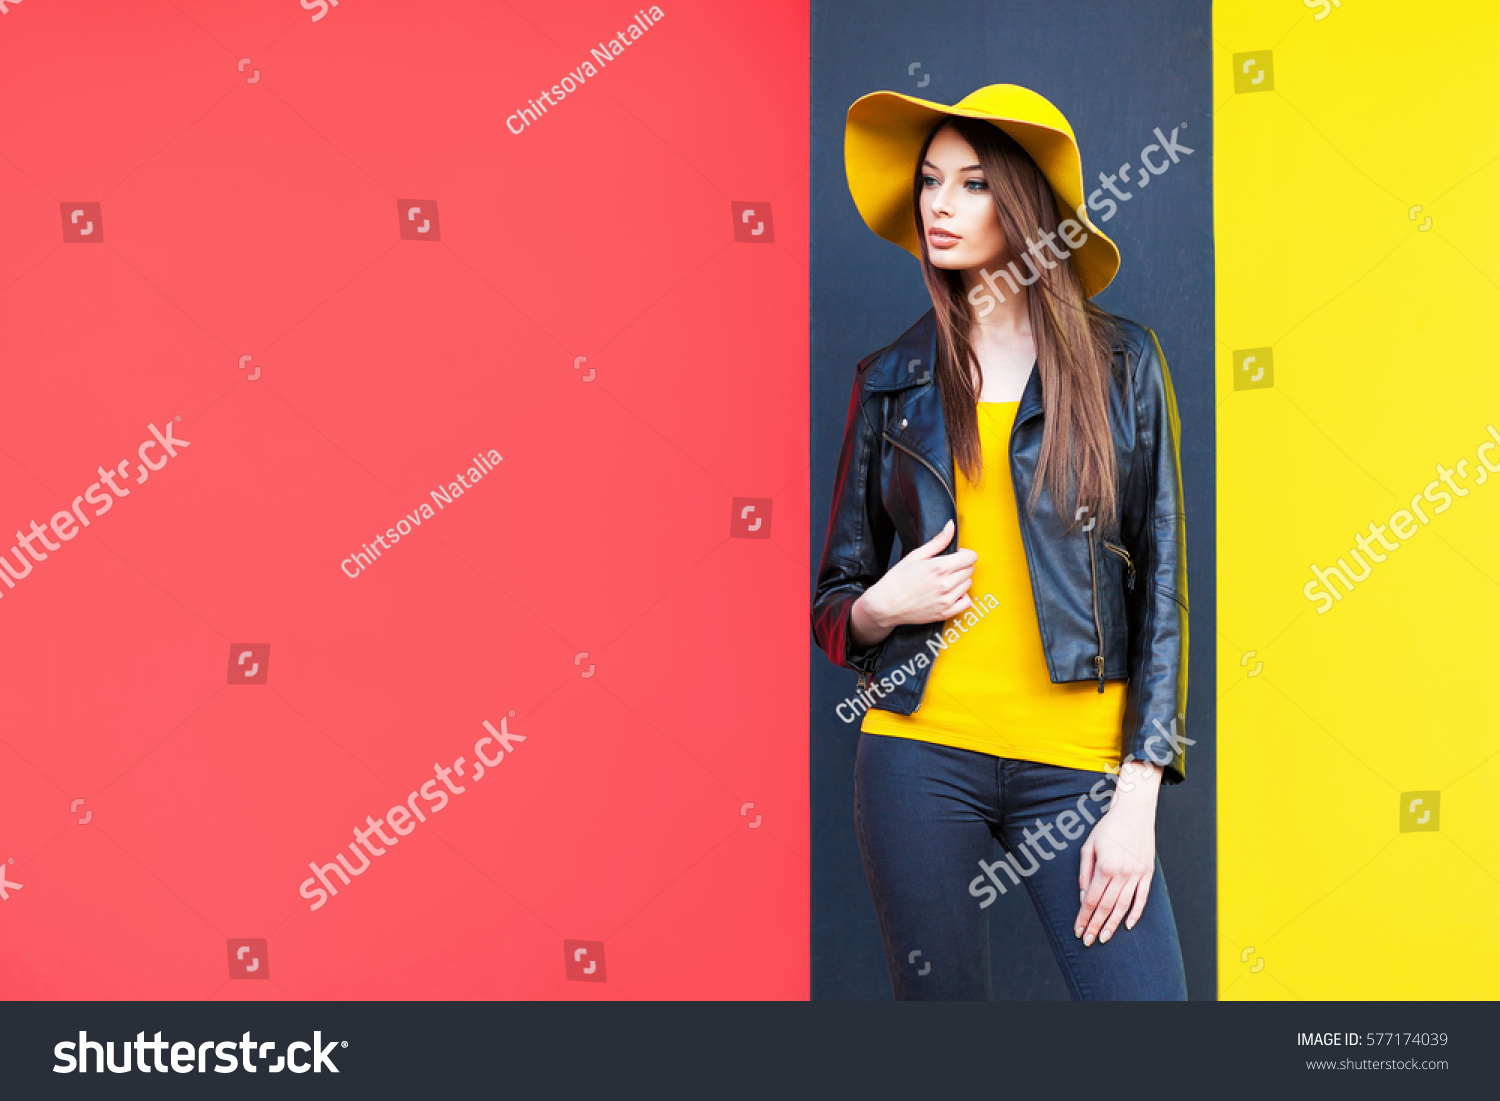 Beautiful young woman in yellow hat #577174039